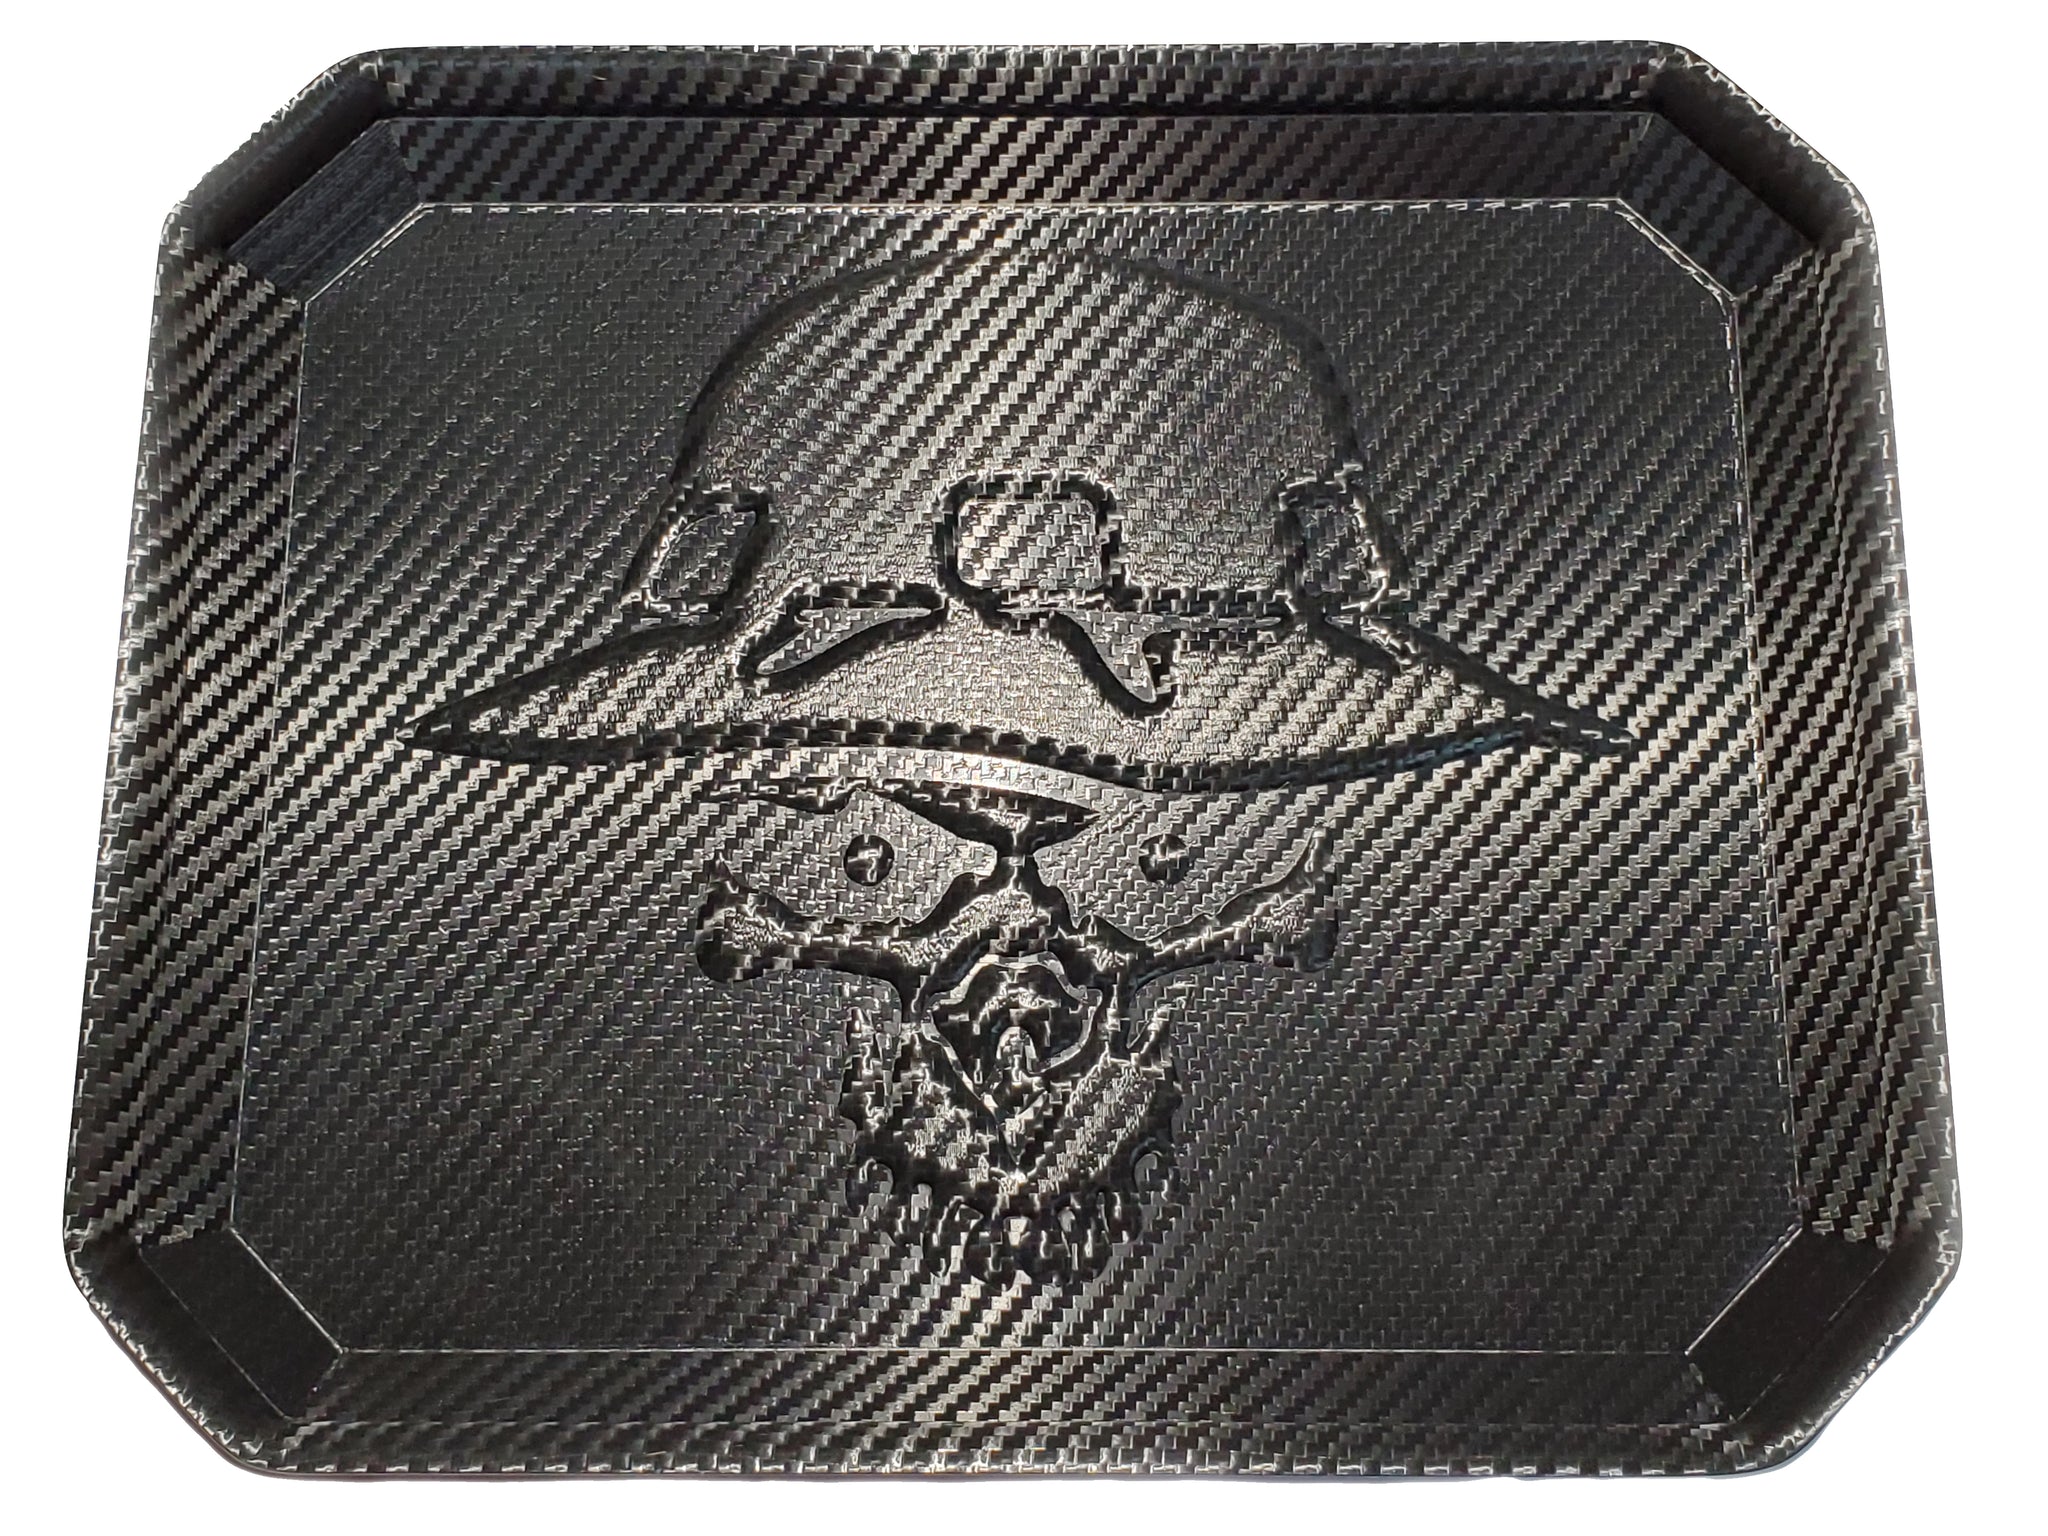 EDC Tray Mold  Quality custom Kydex® holsters at an affordable price.